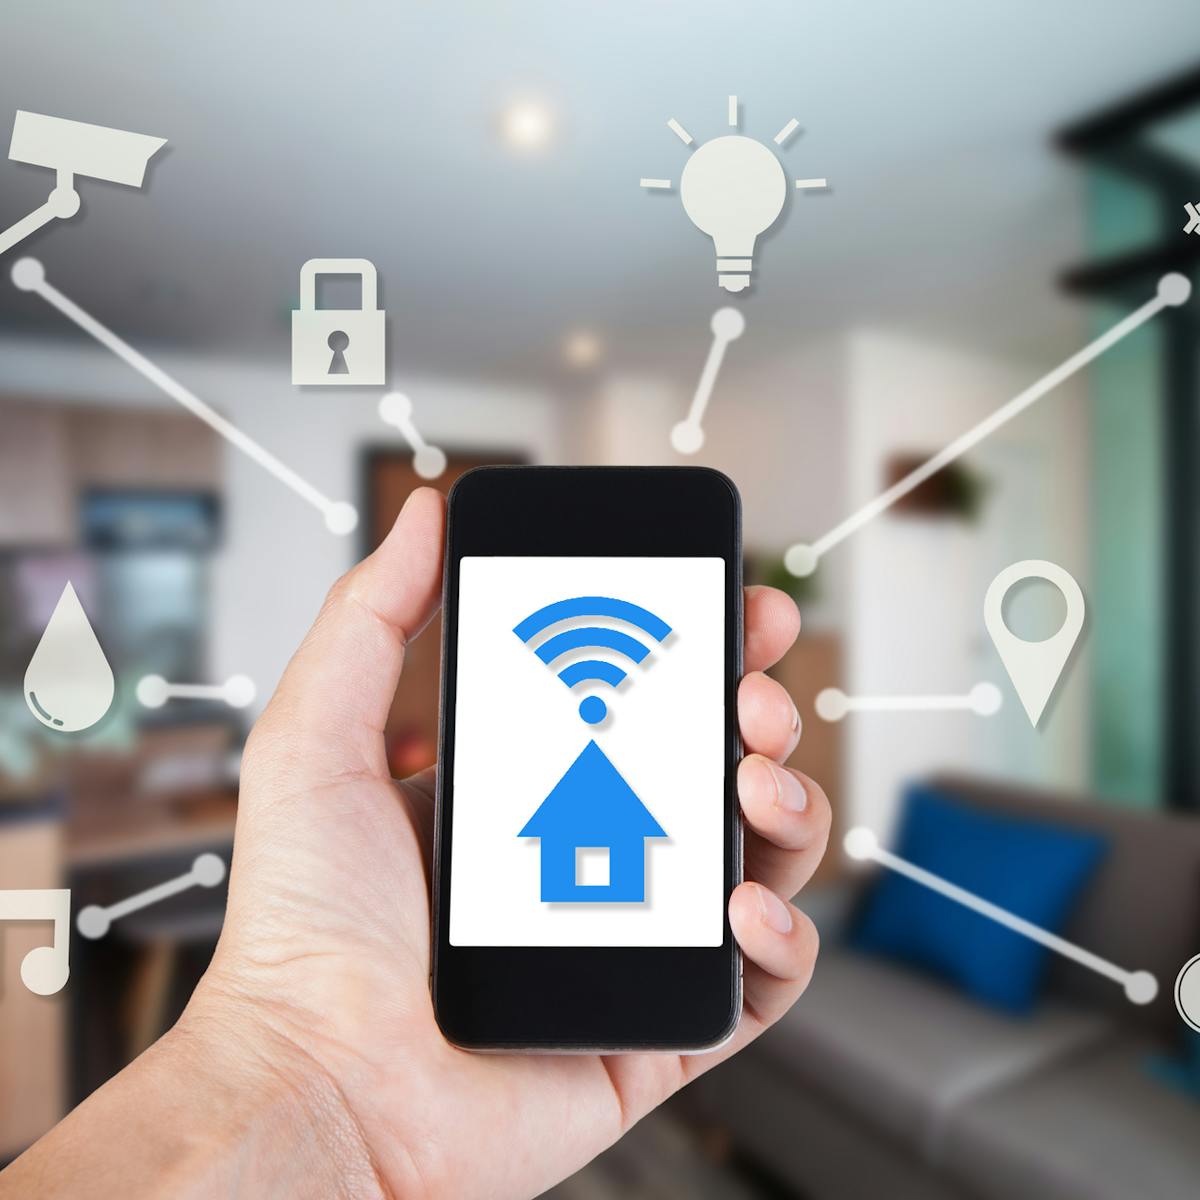 MDU owners and providers have a lot to gain by offering managed Wi-Fi services.